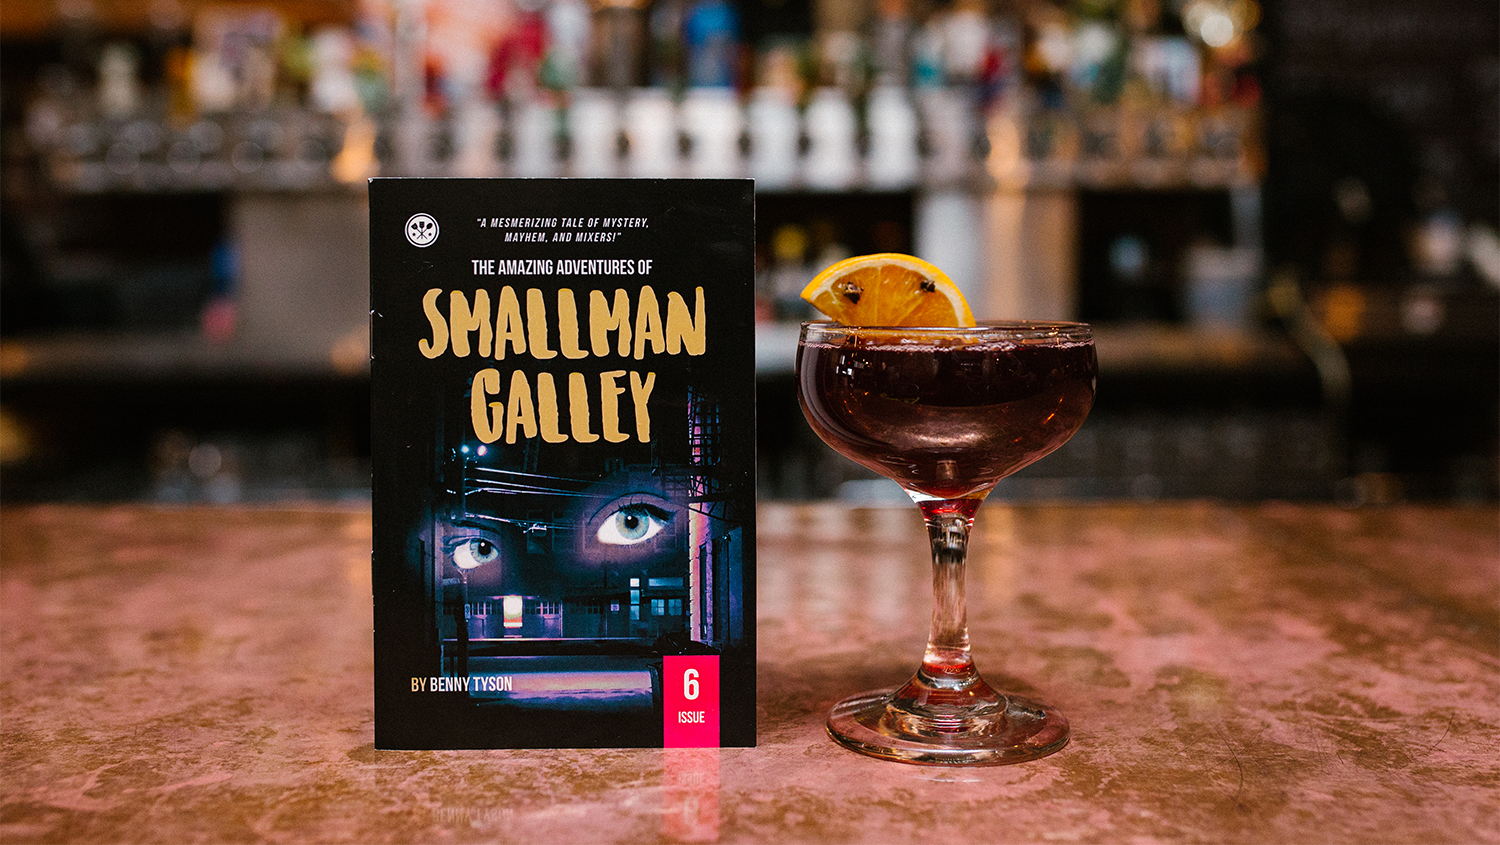 galley group test kitchen port of peril drink and smallman cover photo cred graceful fawn